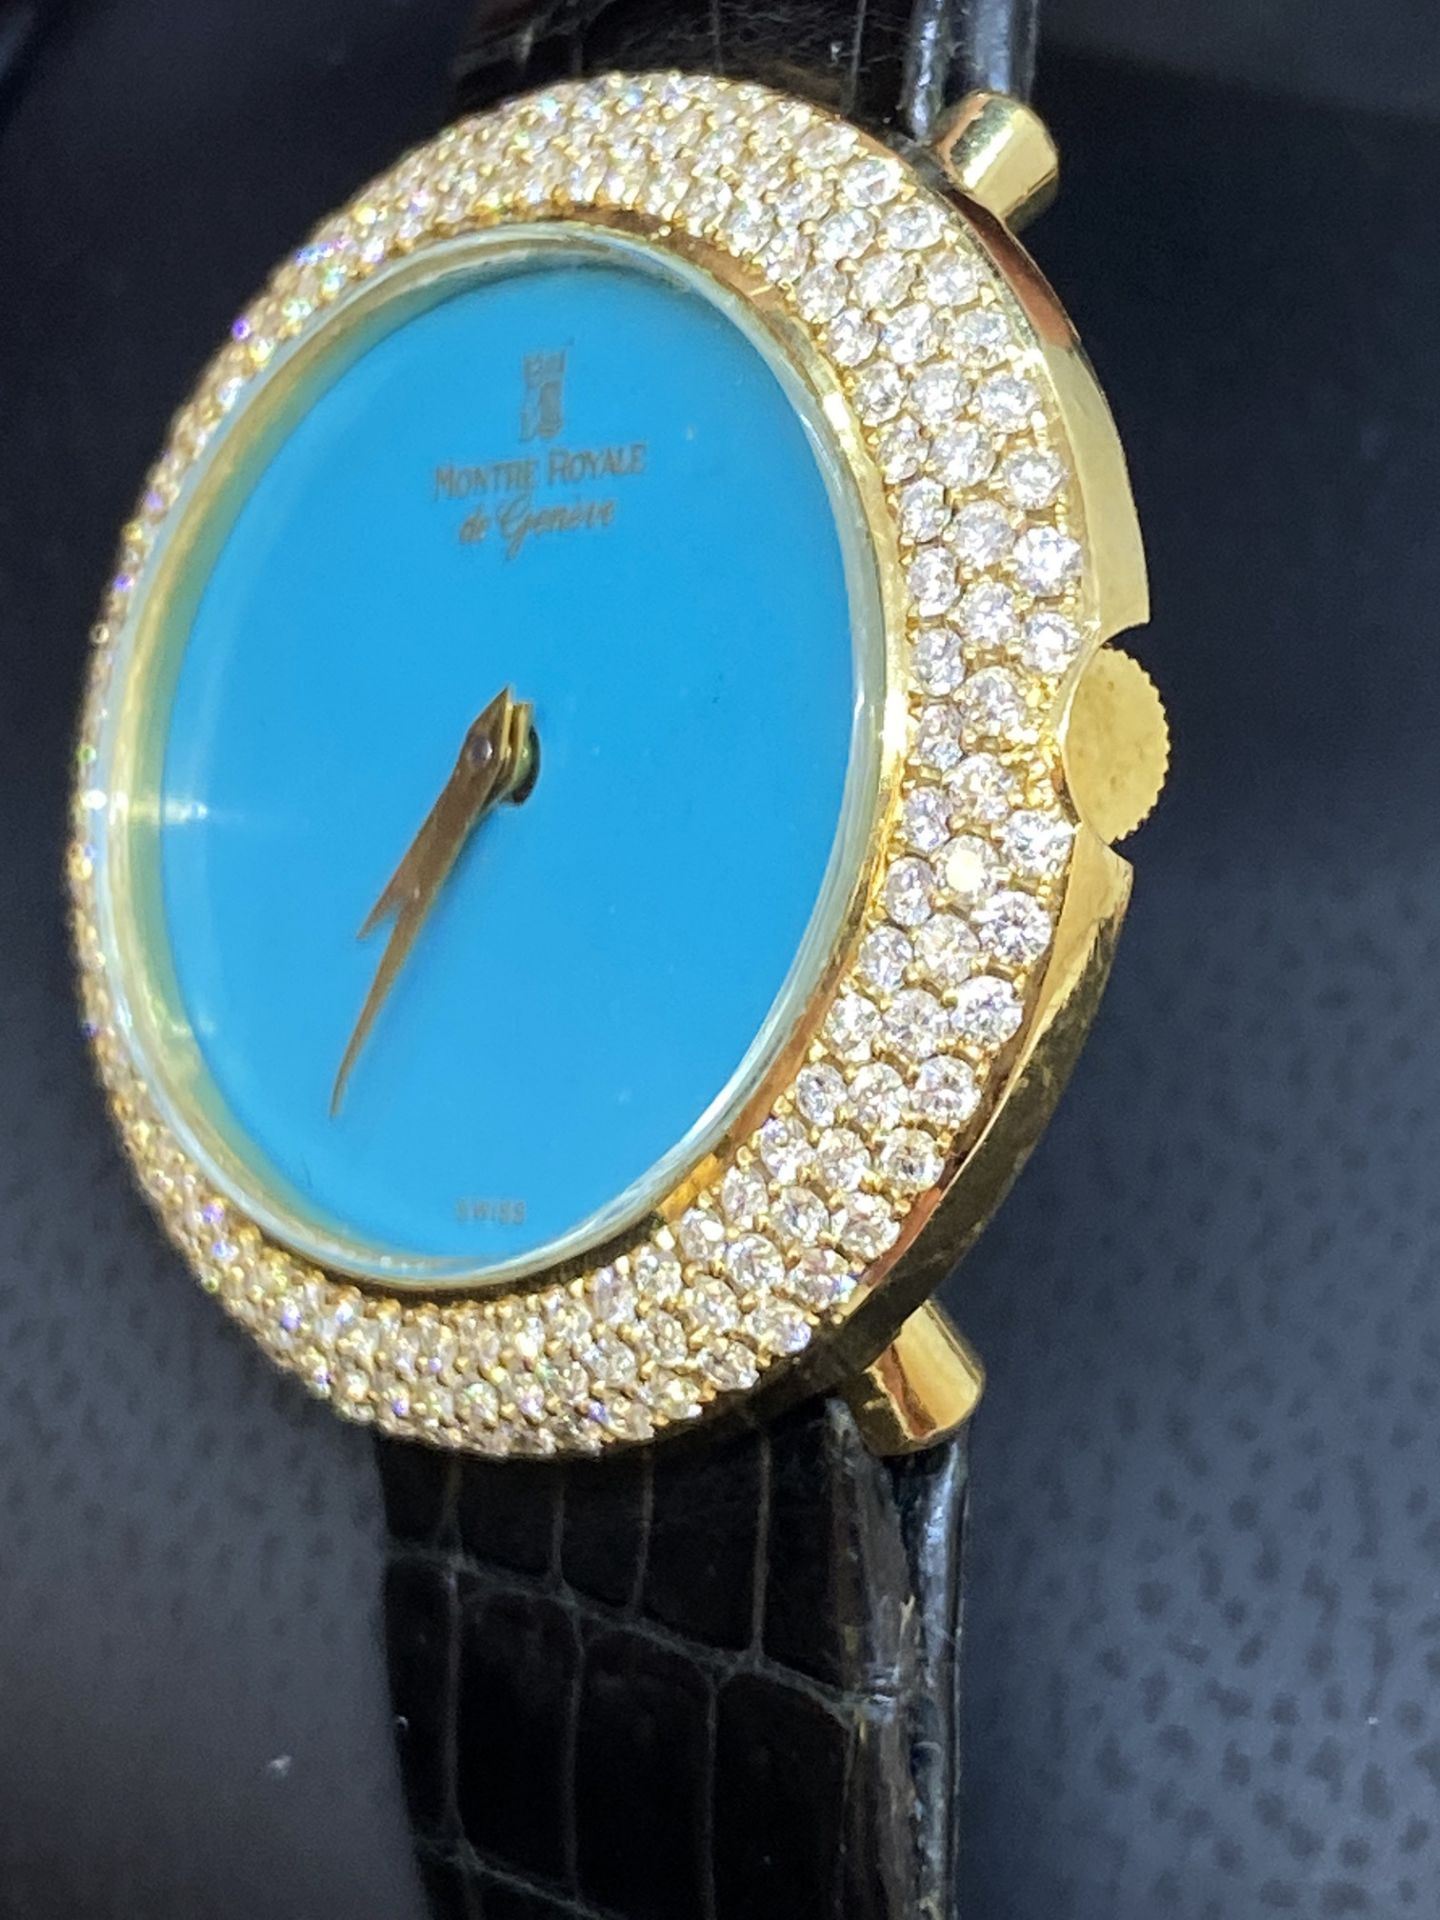 18ct GOLD MONTRE ROYAL LADIES WATCH SET WITH APPROX 4.00cts G/VVS - Image 5 of 9